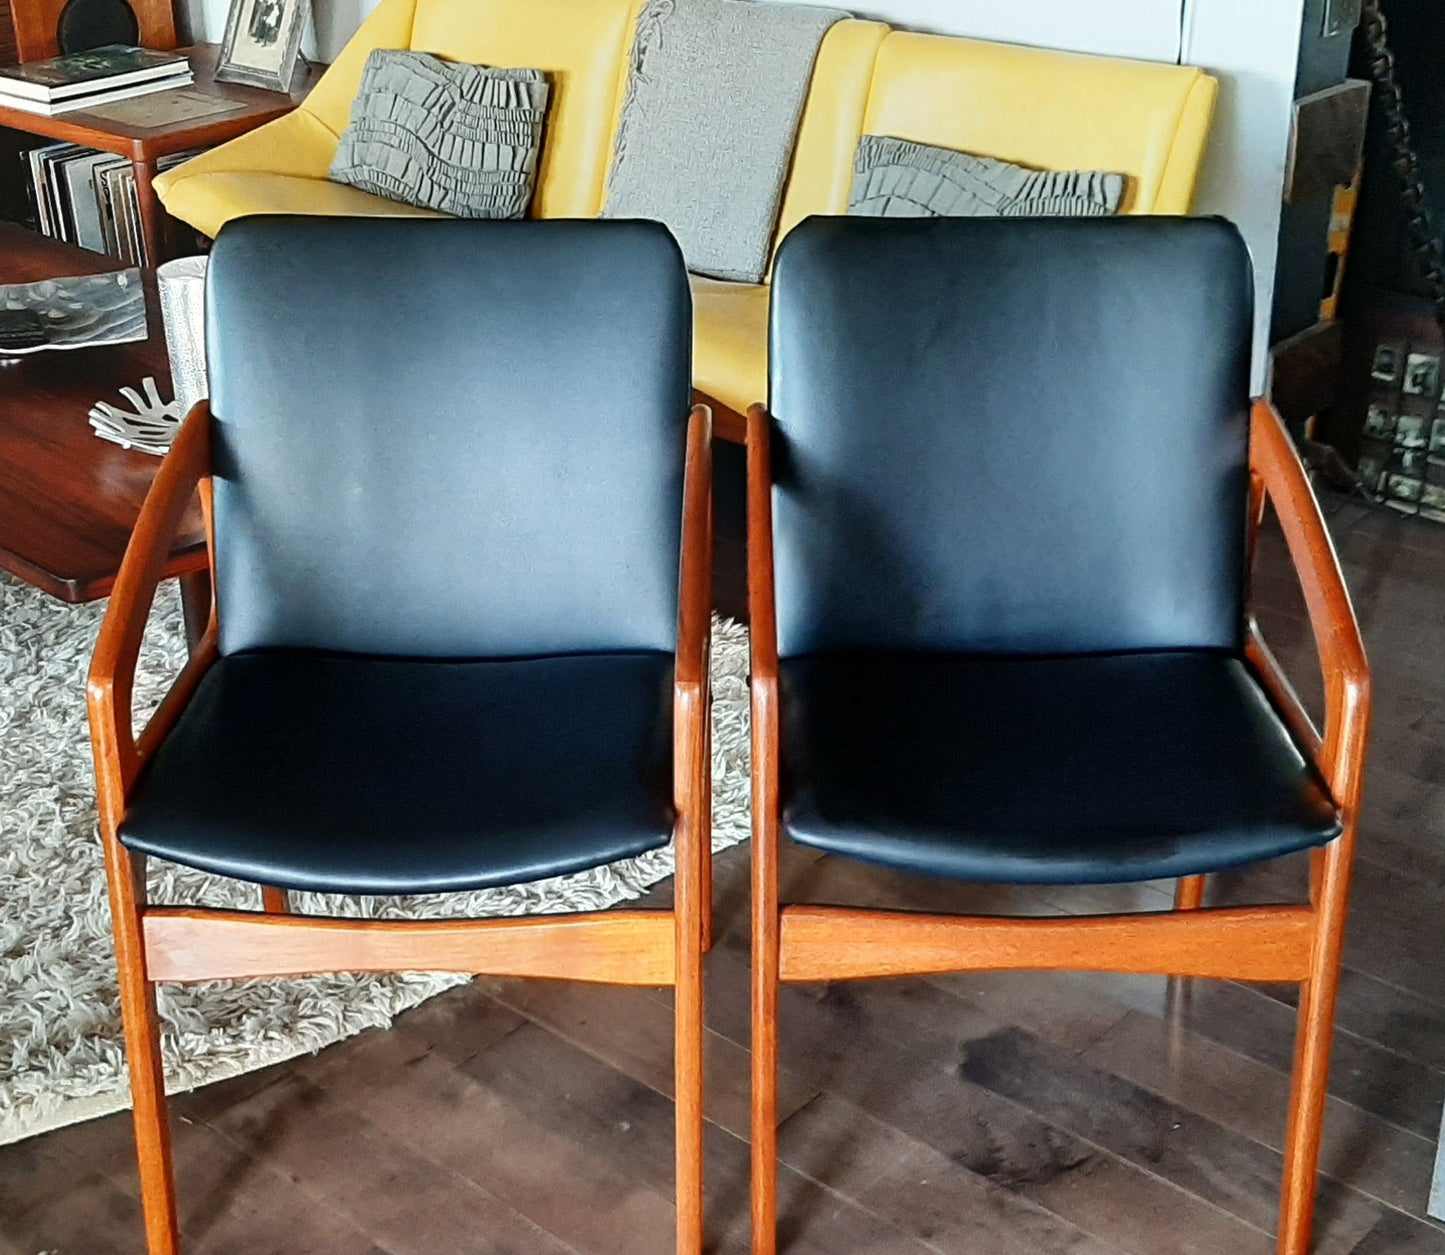 2 REFINISHED REUPHOLSTERED Danish Mid Century Modern Angled Armchairs (have more chairs)